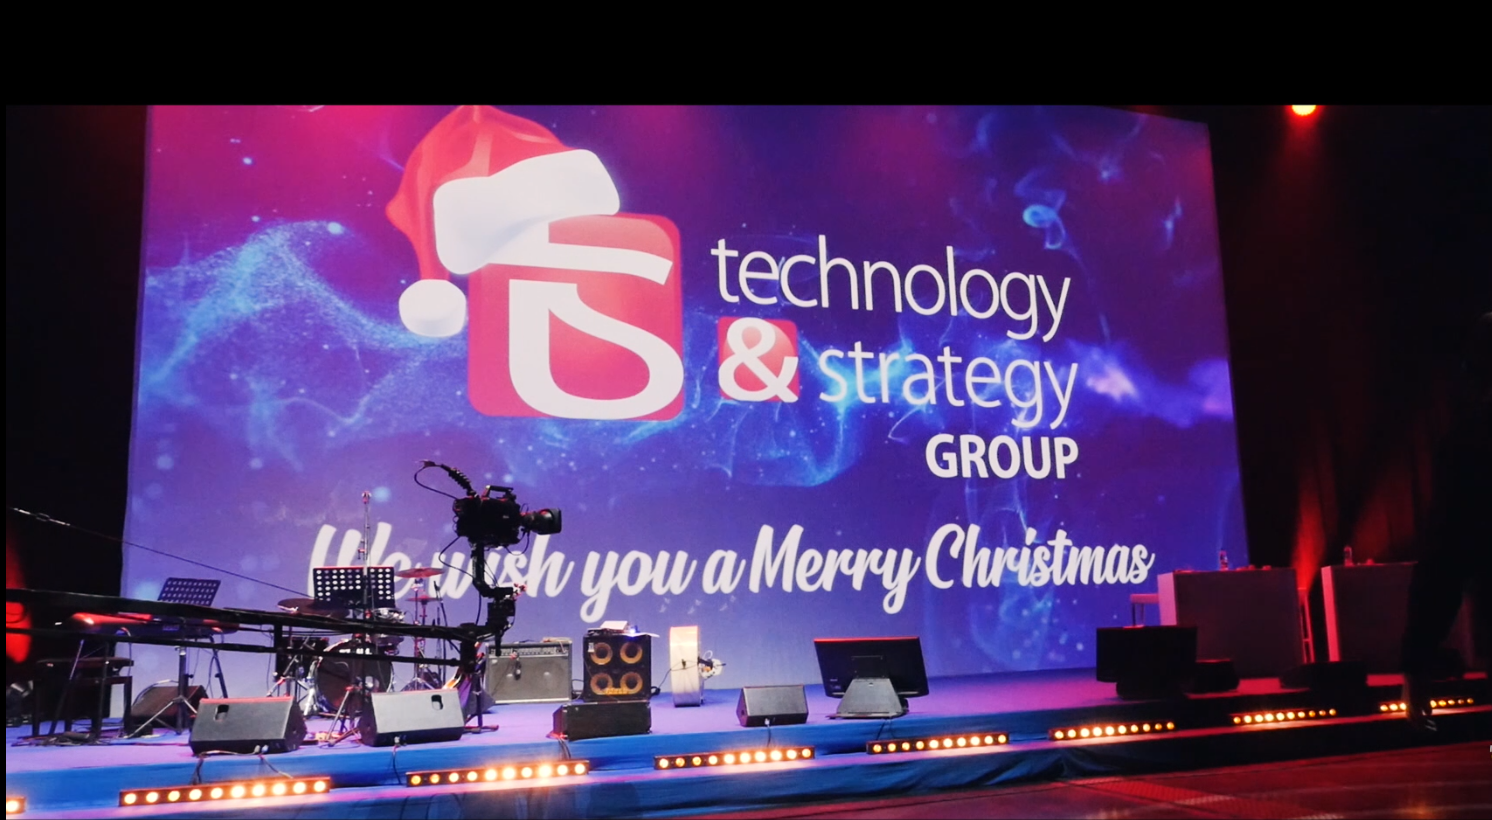 Technology & Strategy convention